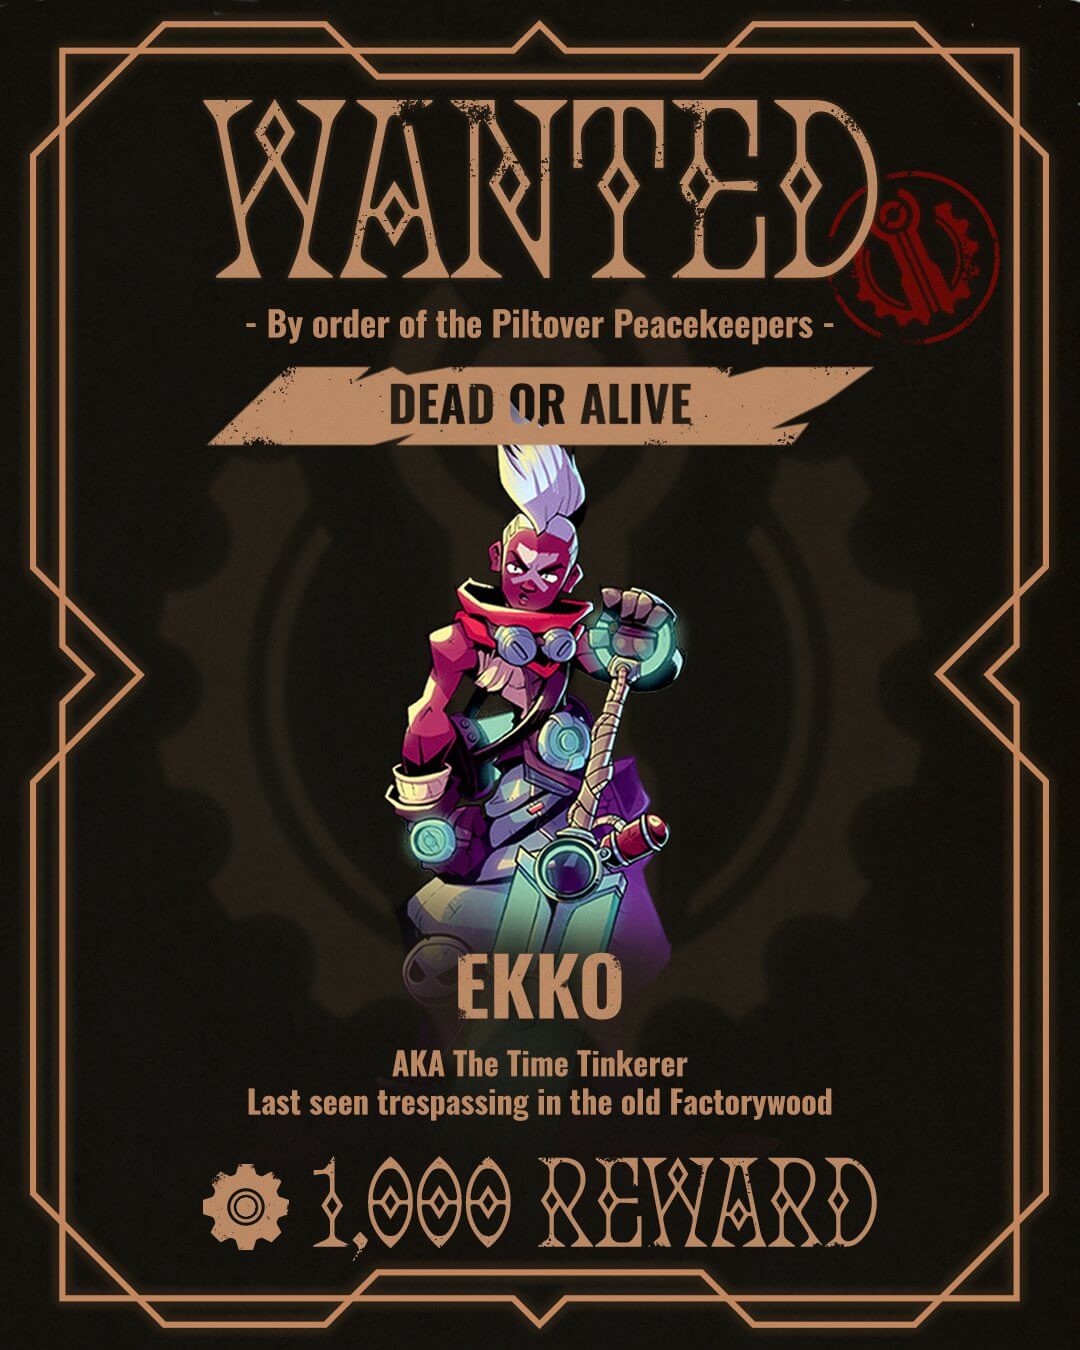 Wanted (Dead or Alive) Posted of Ekko, AKA the Time Tinkerer